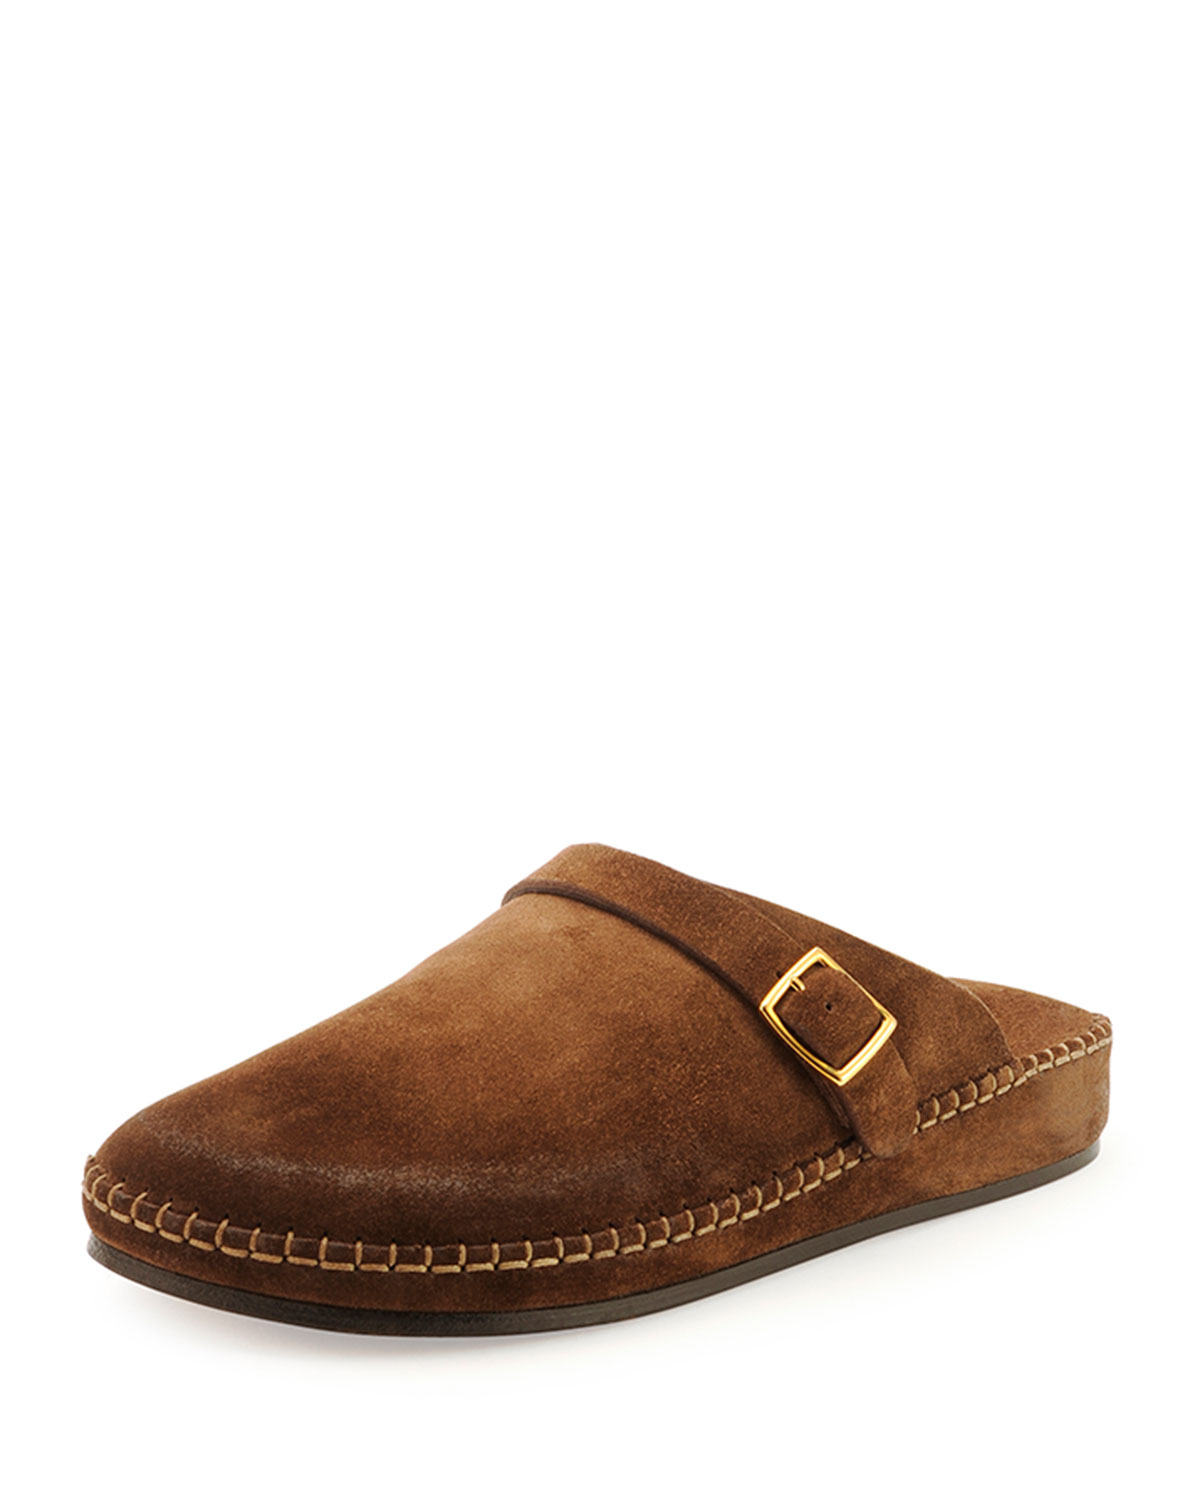 Tom Ford Edie Suede Clog Shoes in Brown for Men - Lyst